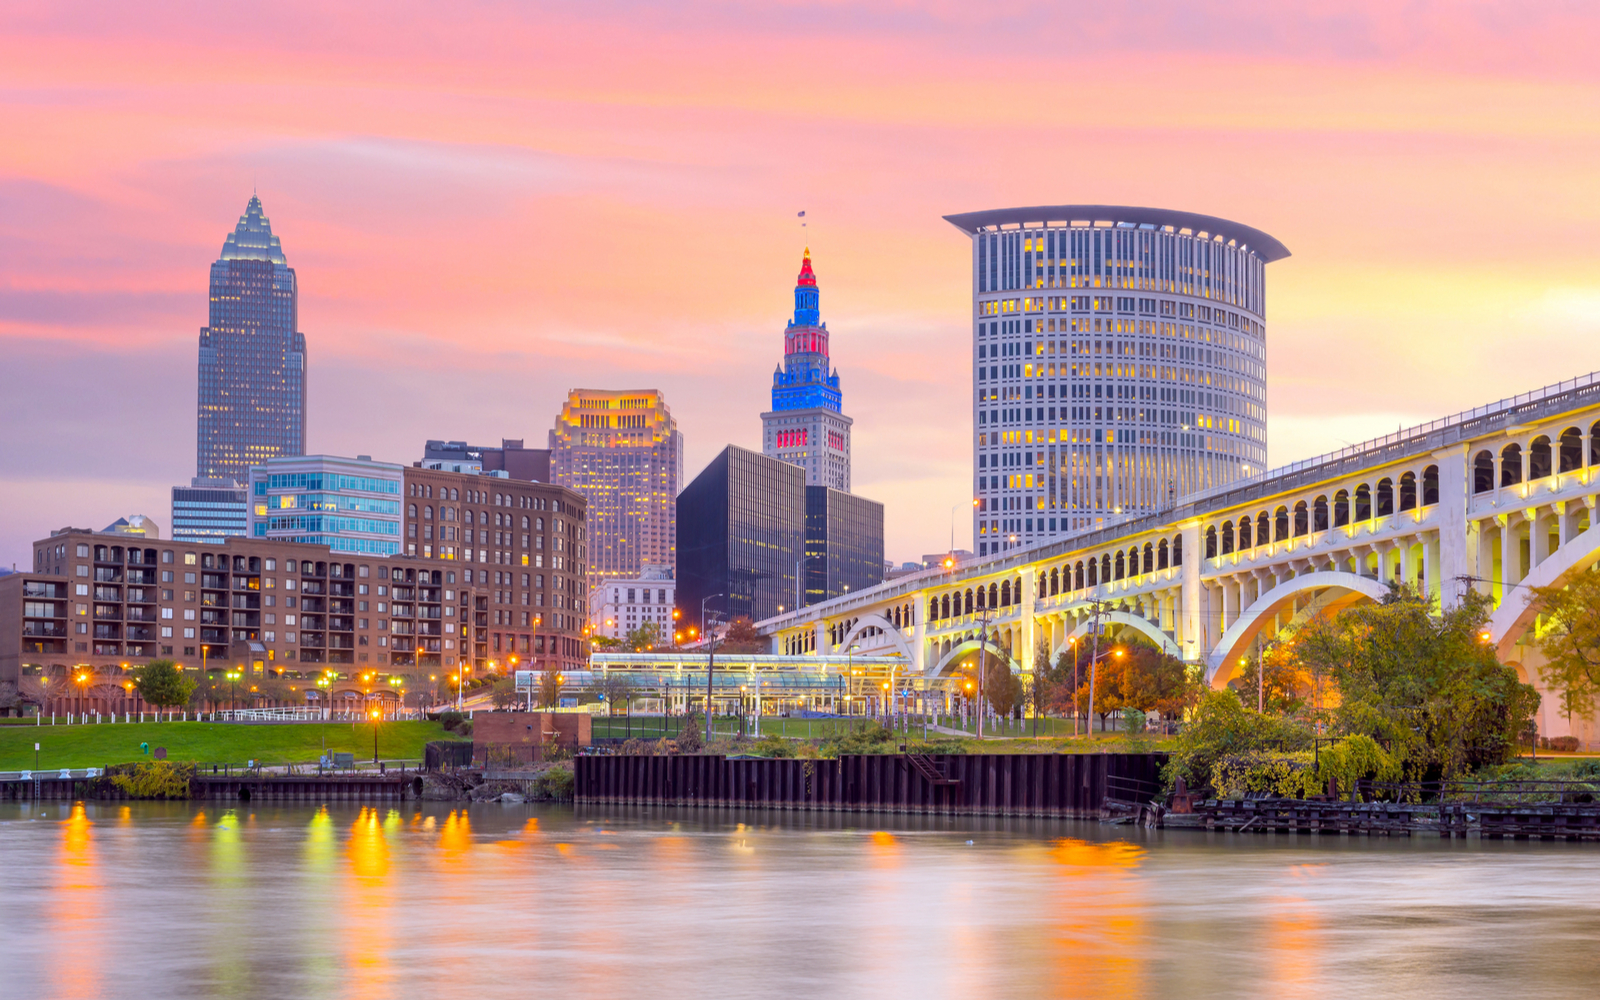 8 Best Things to Do in Ohio in 2022